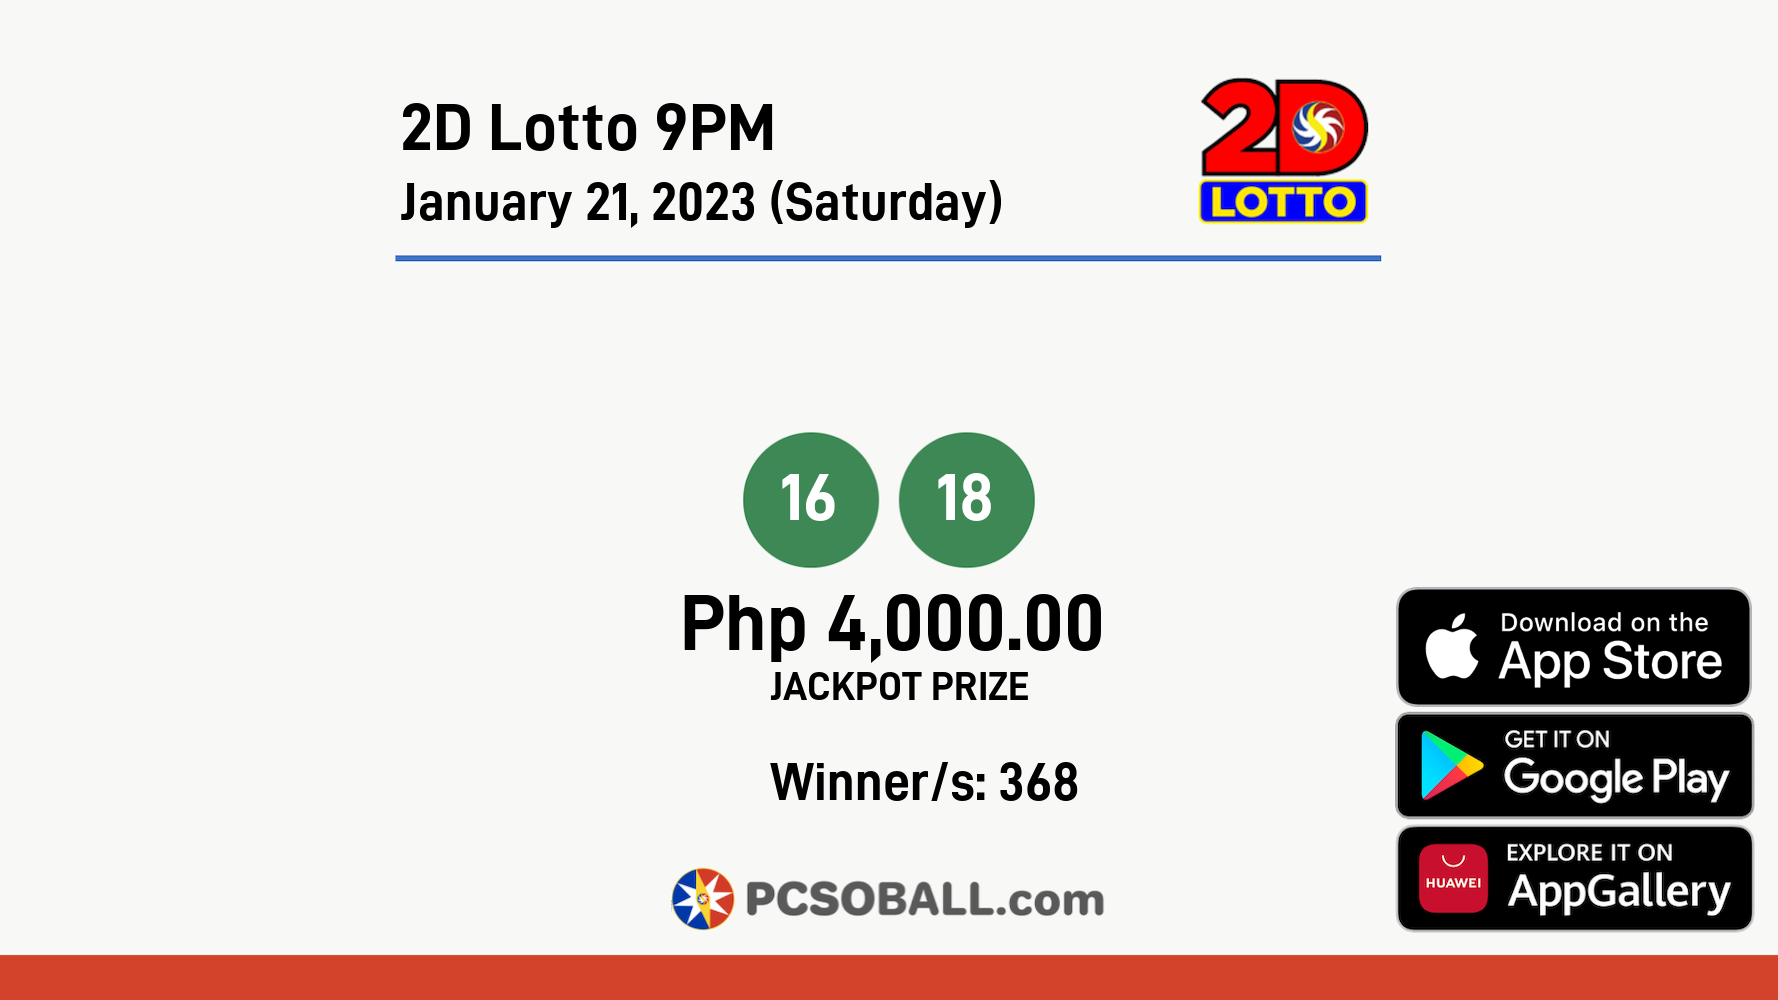 2D Lotto 9PM January 21, 2023 (Saturday) Result